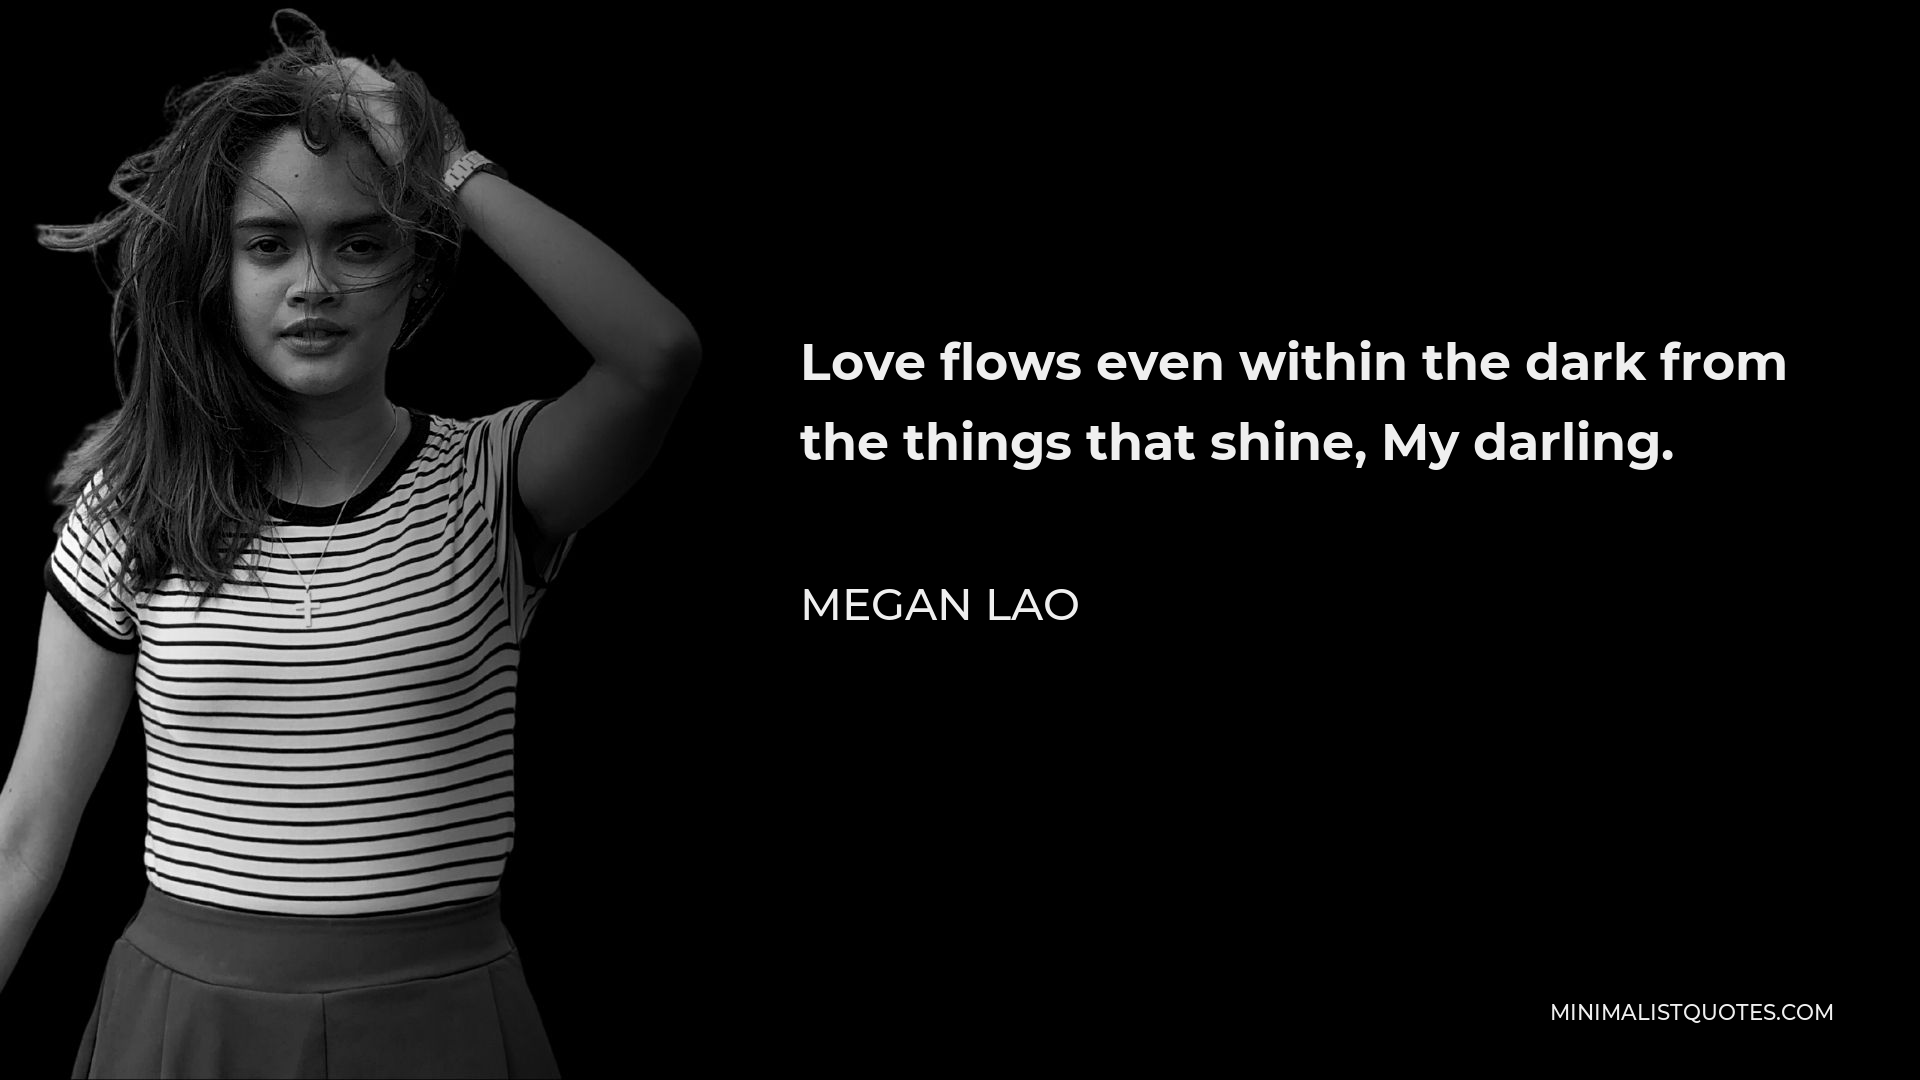 Megan Lao Quote - Love flows even within the dark from the things that shine, My darling.